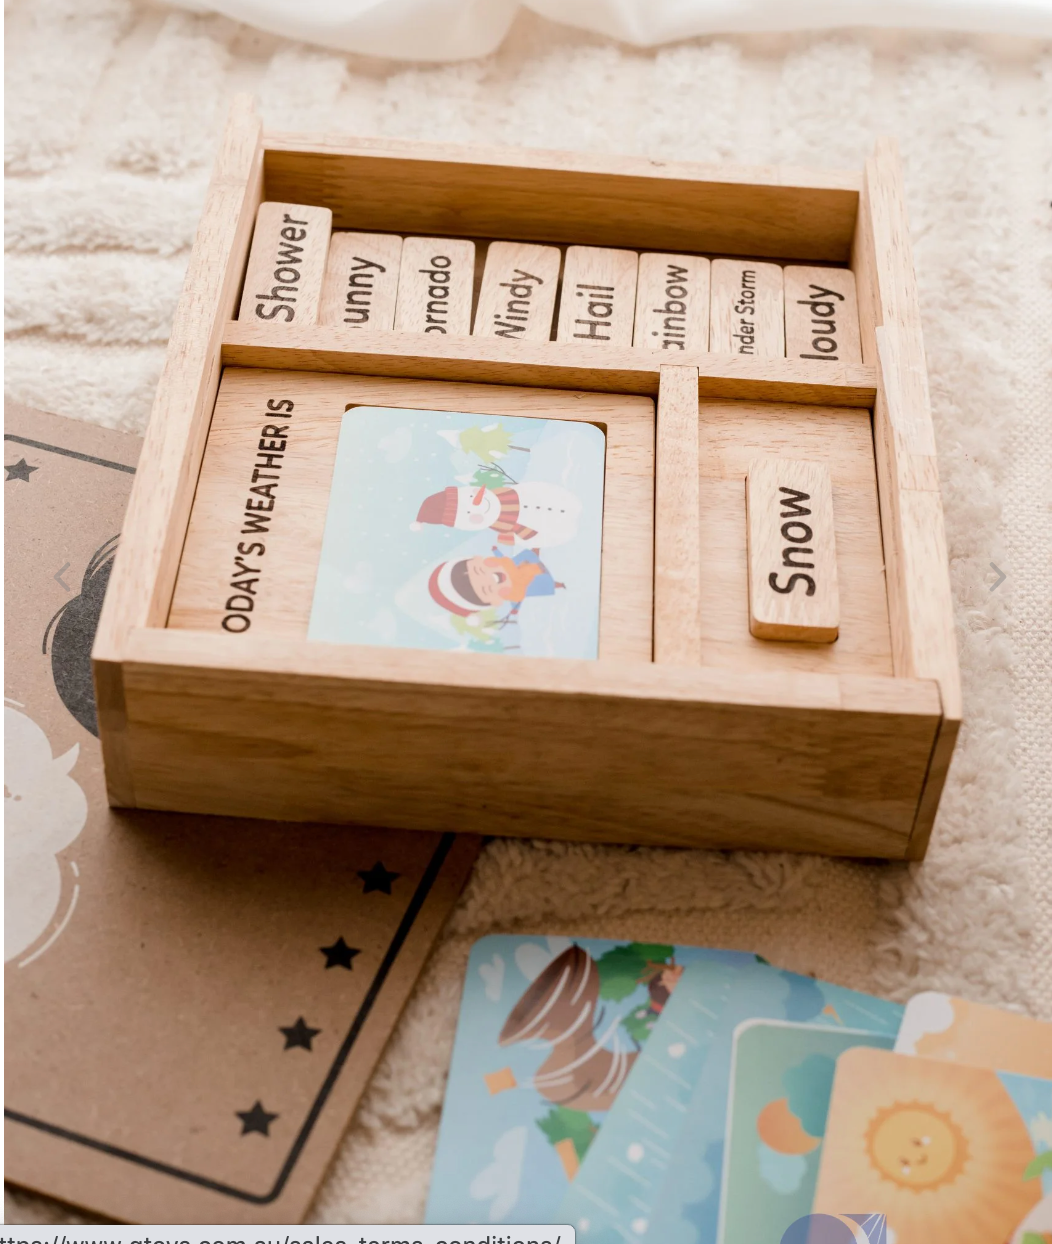 WEATHER PLAY SET